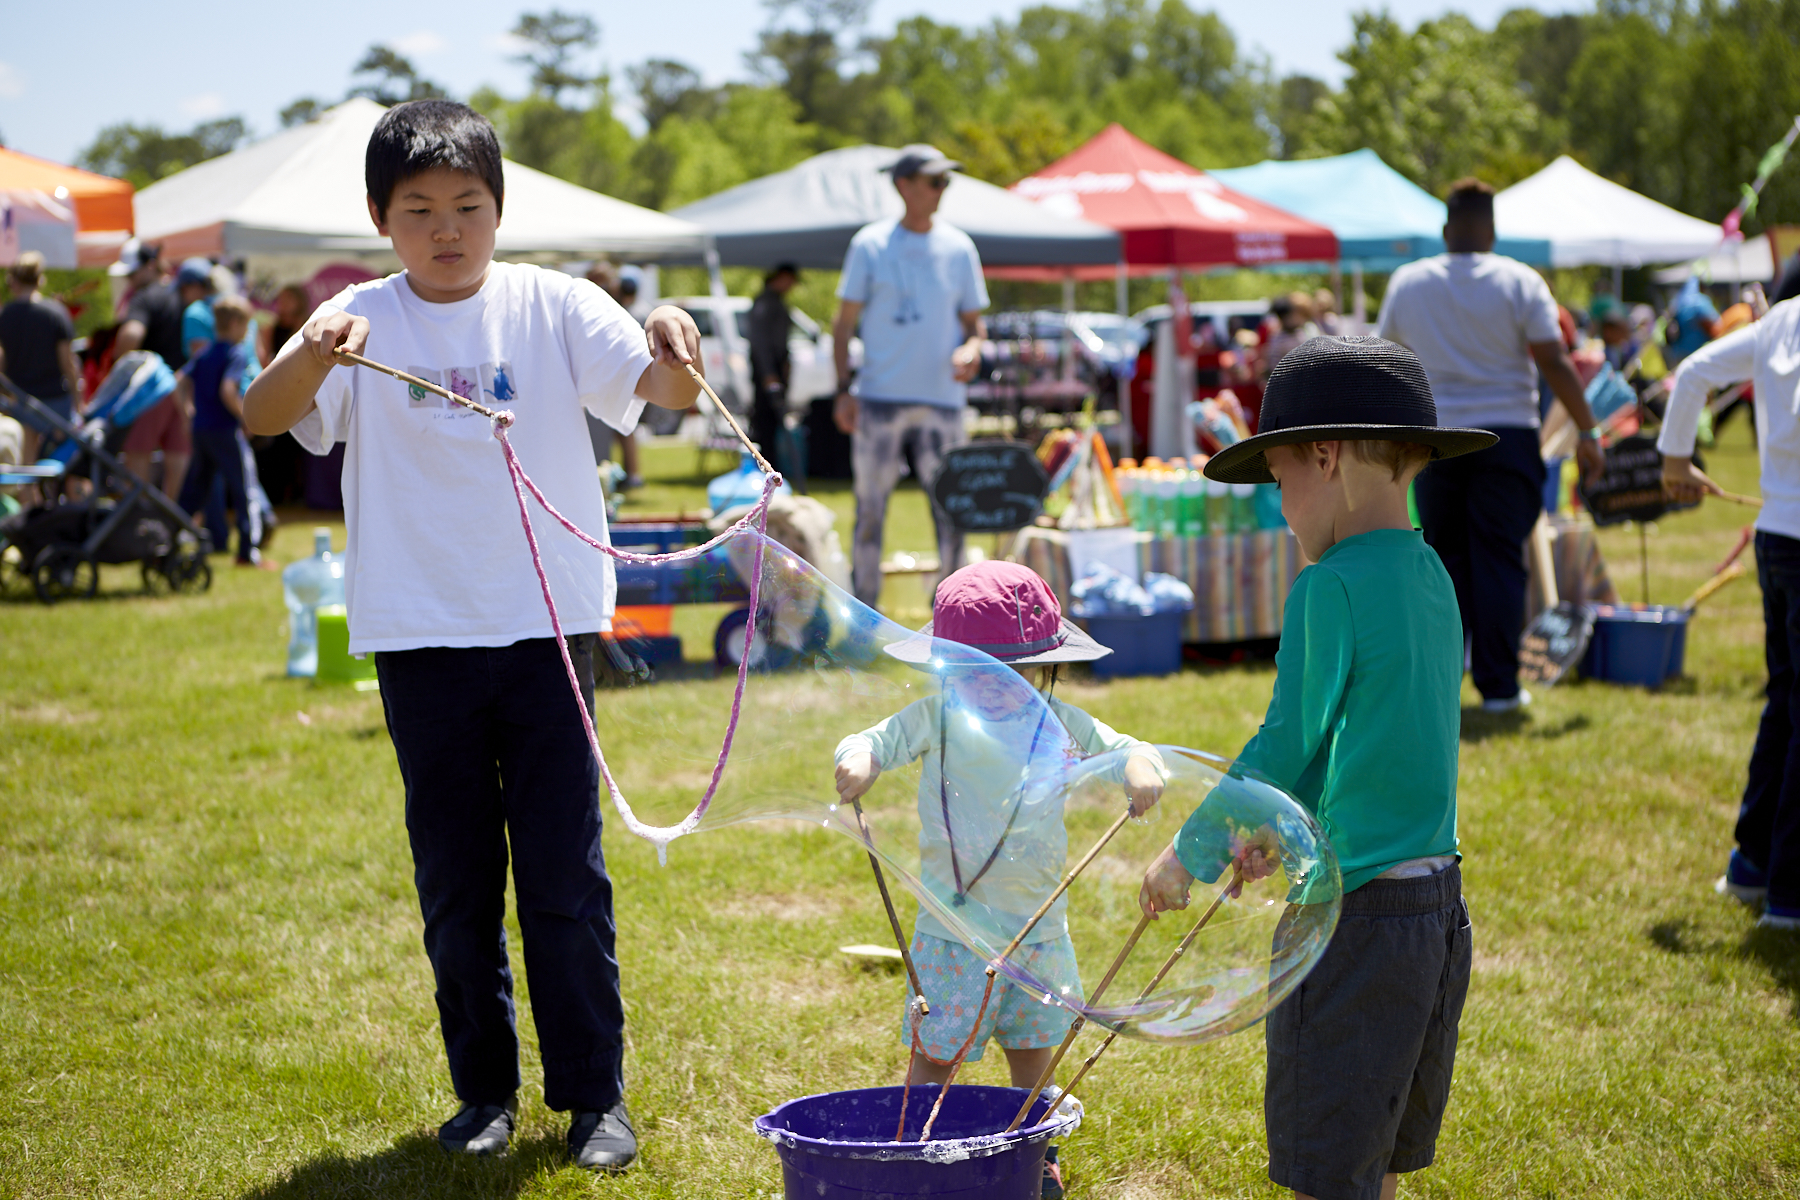 Photo of medium height boy, small girl in a sunhat, and a small boy in a sunhat making giant bubbles